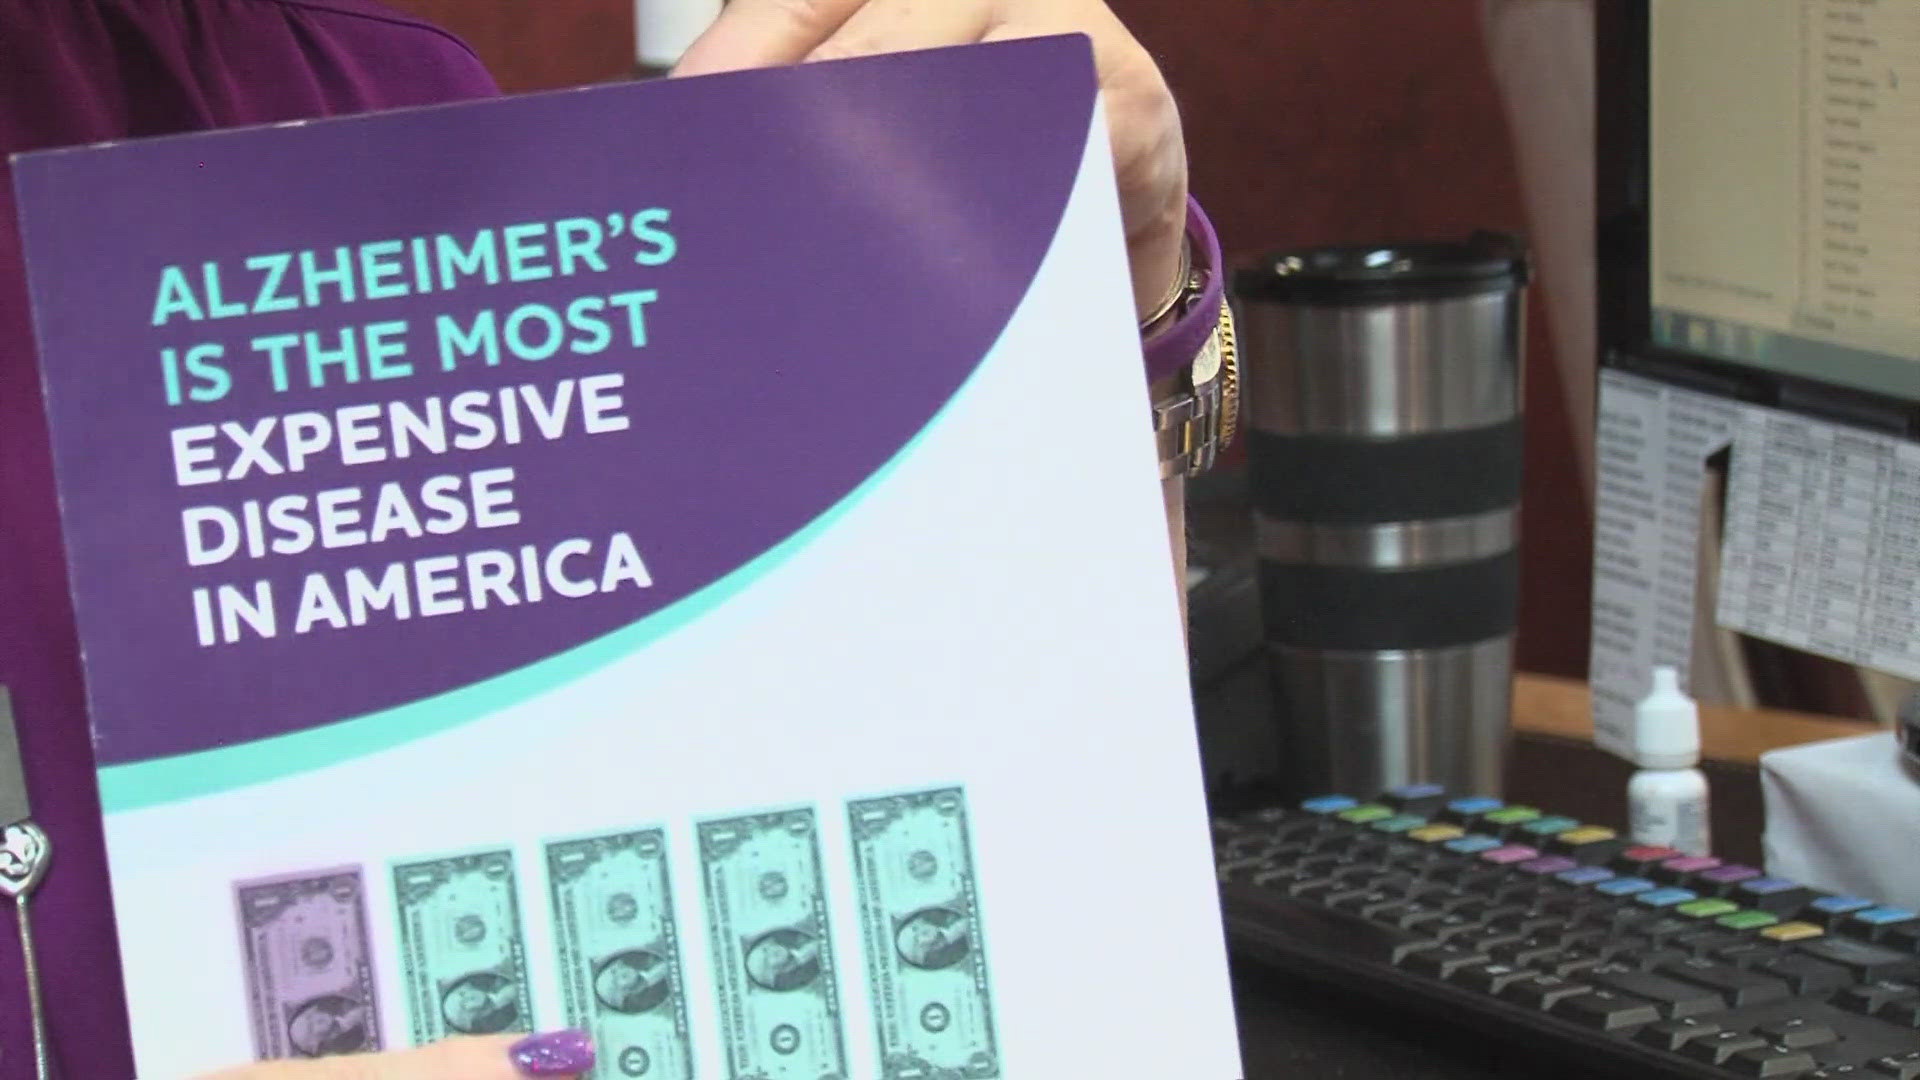 Alzheimer's Association of West Texas talks about what the FDA Advisory Council's decision means for those struggling with Alzheimer's Disease.